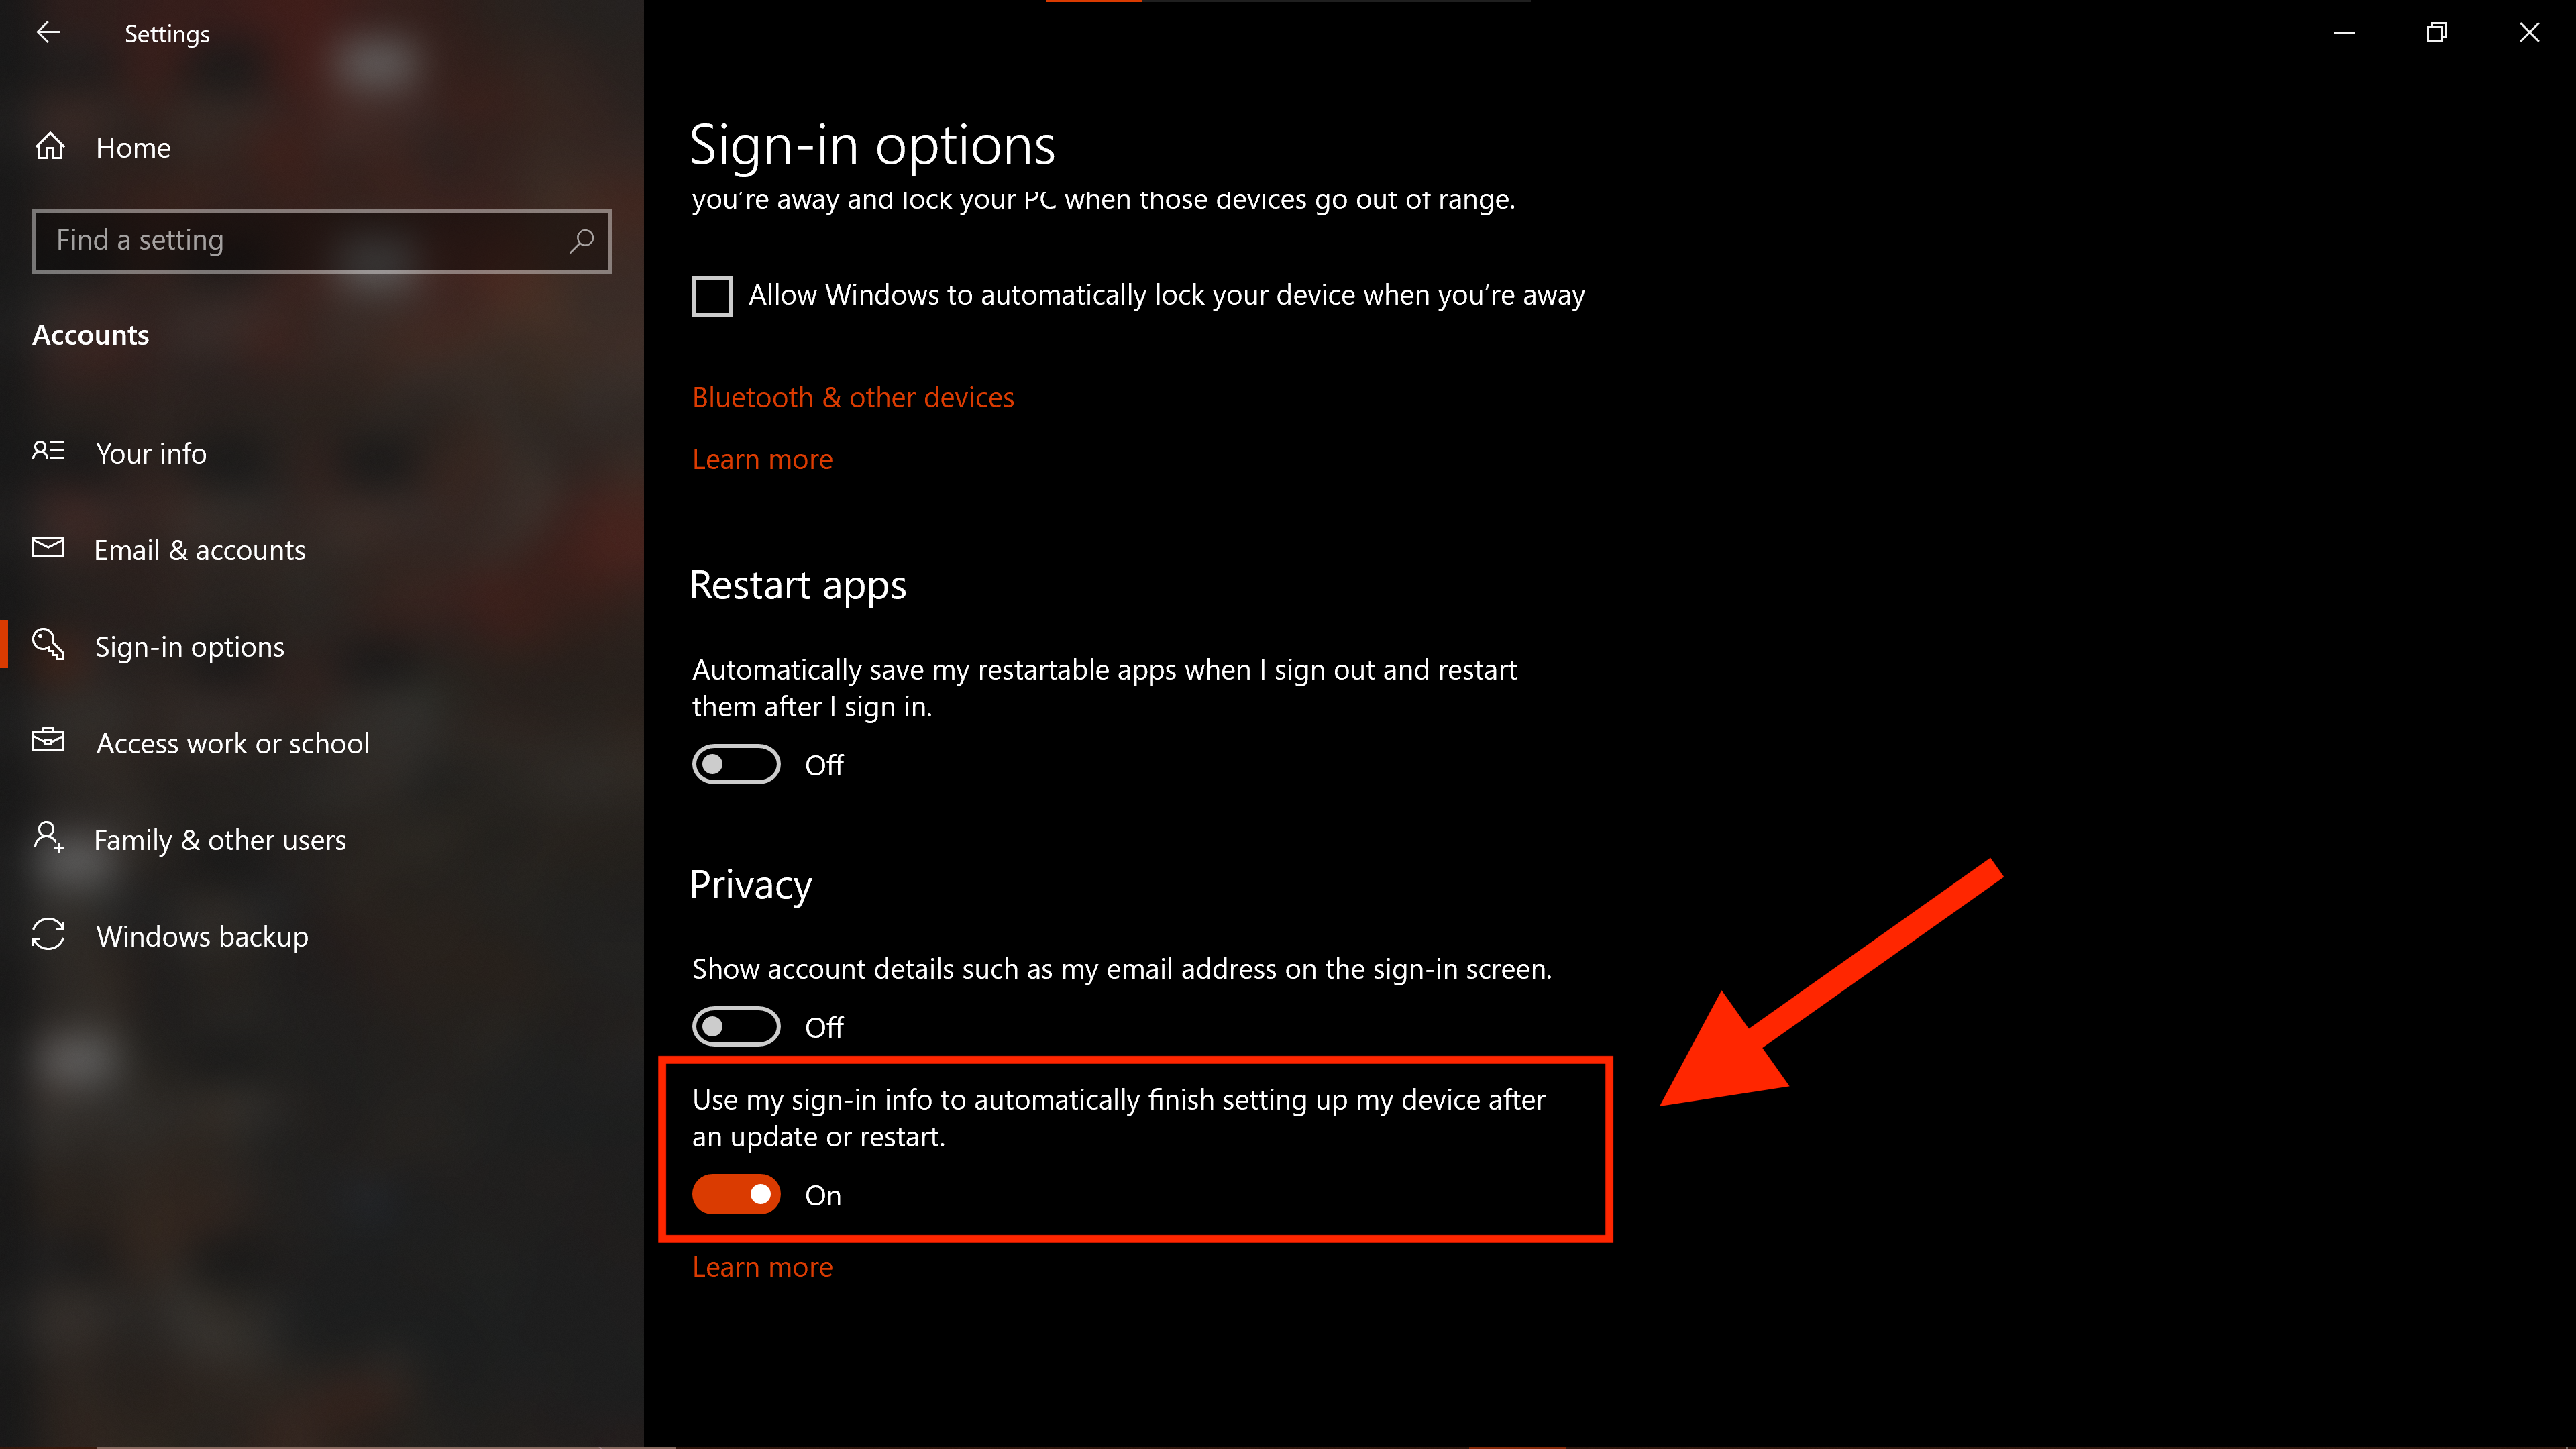 Screenshot of the Windows “Sign-in options” window. Toward the bottom, underneath the “Privacy” section, there are two buttons. The first "Show account details such as my email address on the sign-in screen" button is toggled "off." The second "Use my sign-in info to automatically finish setting up my device after an update or restart" is toggled "on" and has a large red arrow pointing toward it and a red rectangle surrounding it.